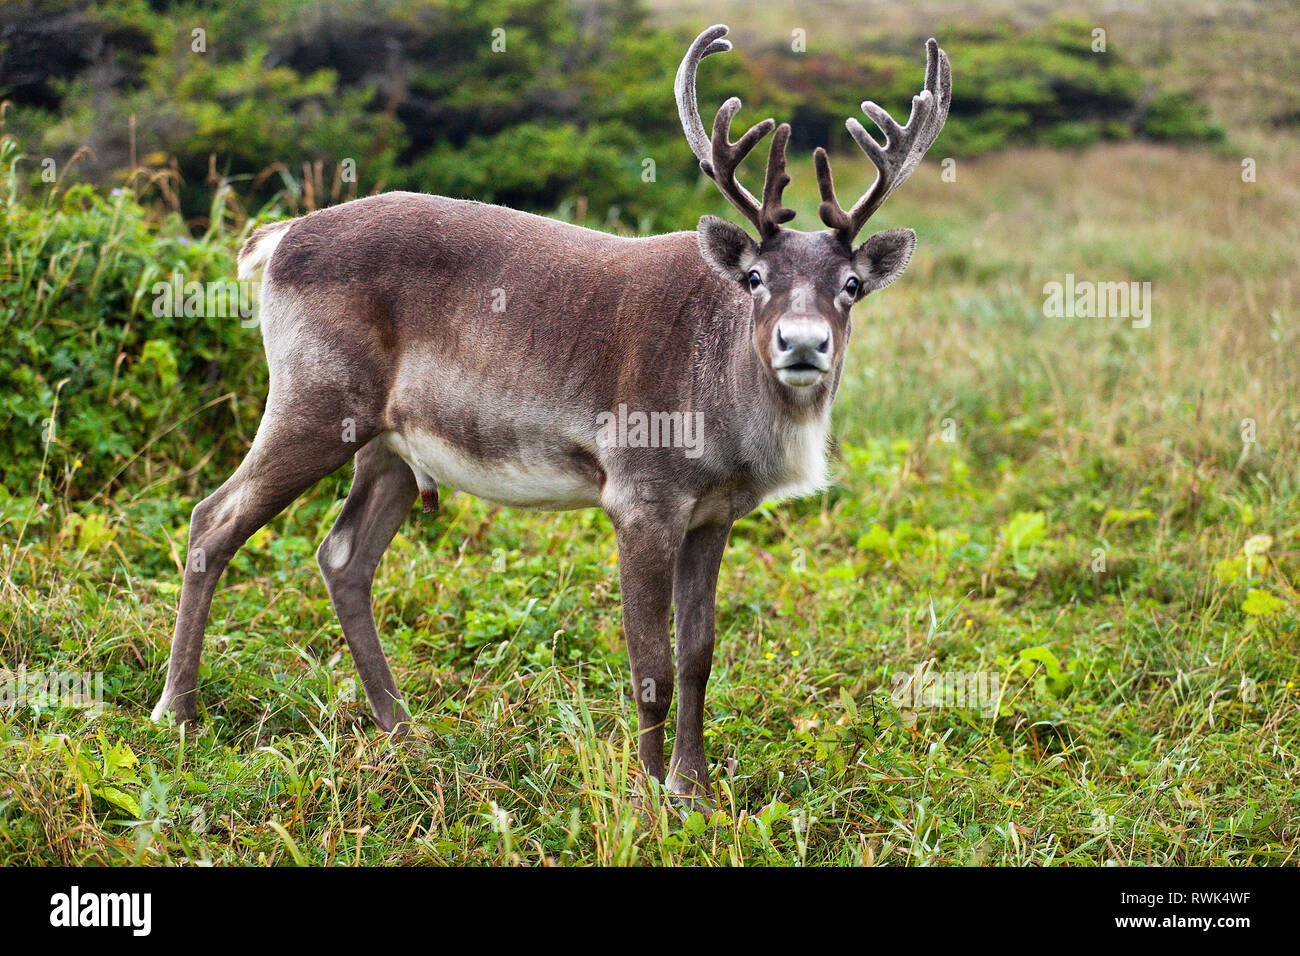 Adult male caribou with velvet-covered antlers in a clearing at the Port au Choix National Historic Site, Port au Choix, Newfoundland, Canada Stock Photo